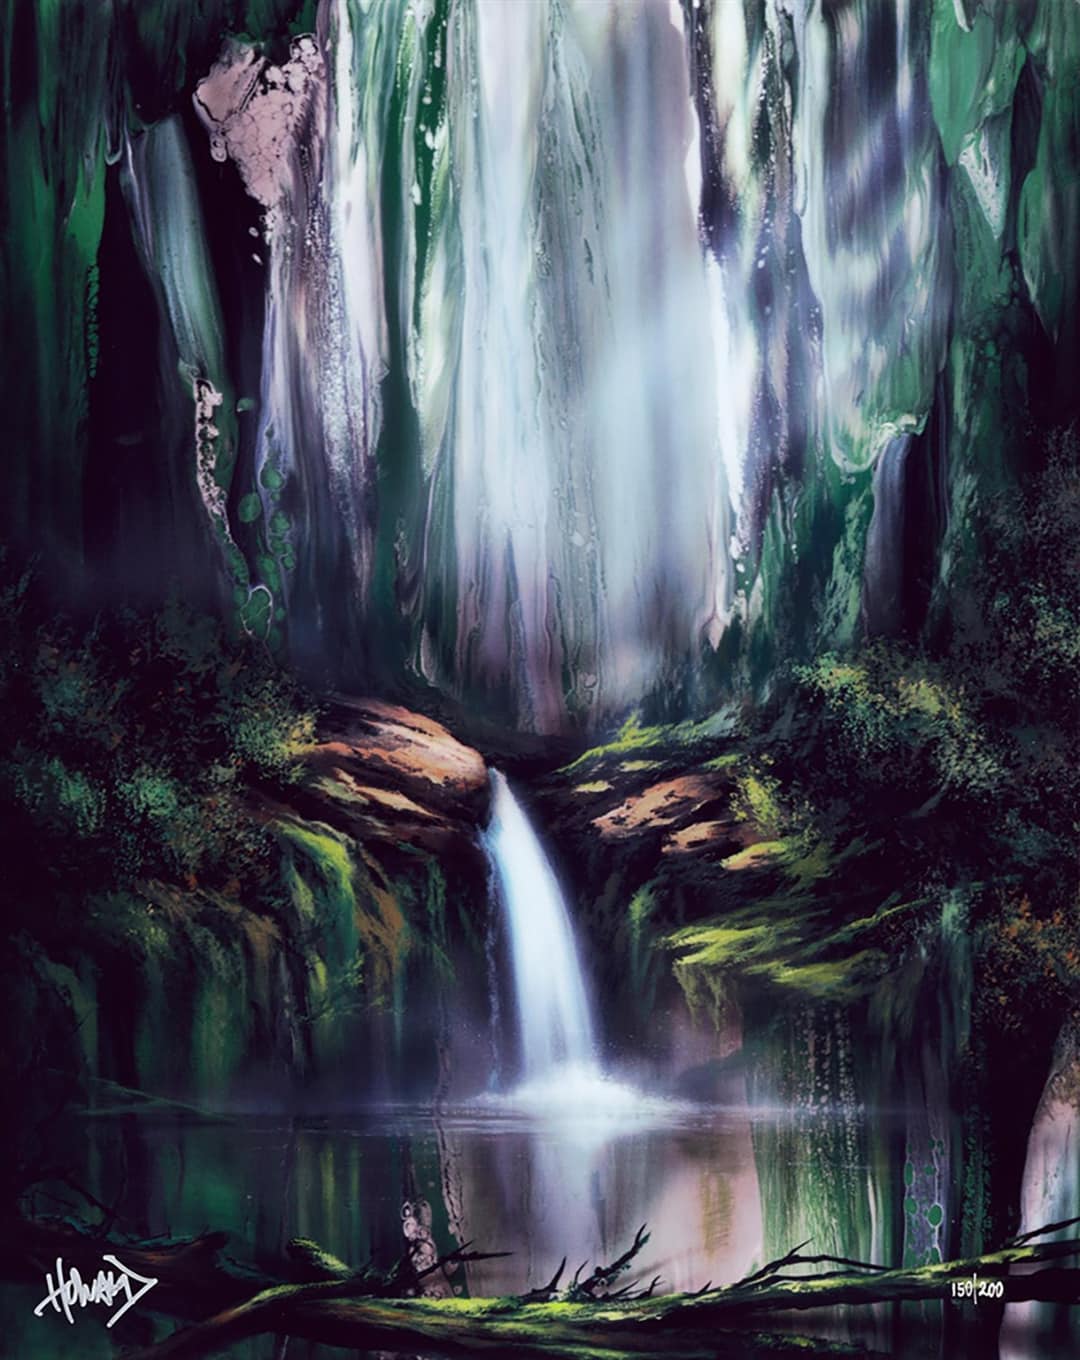 Ashton Howard painting of a waterfall in a forest